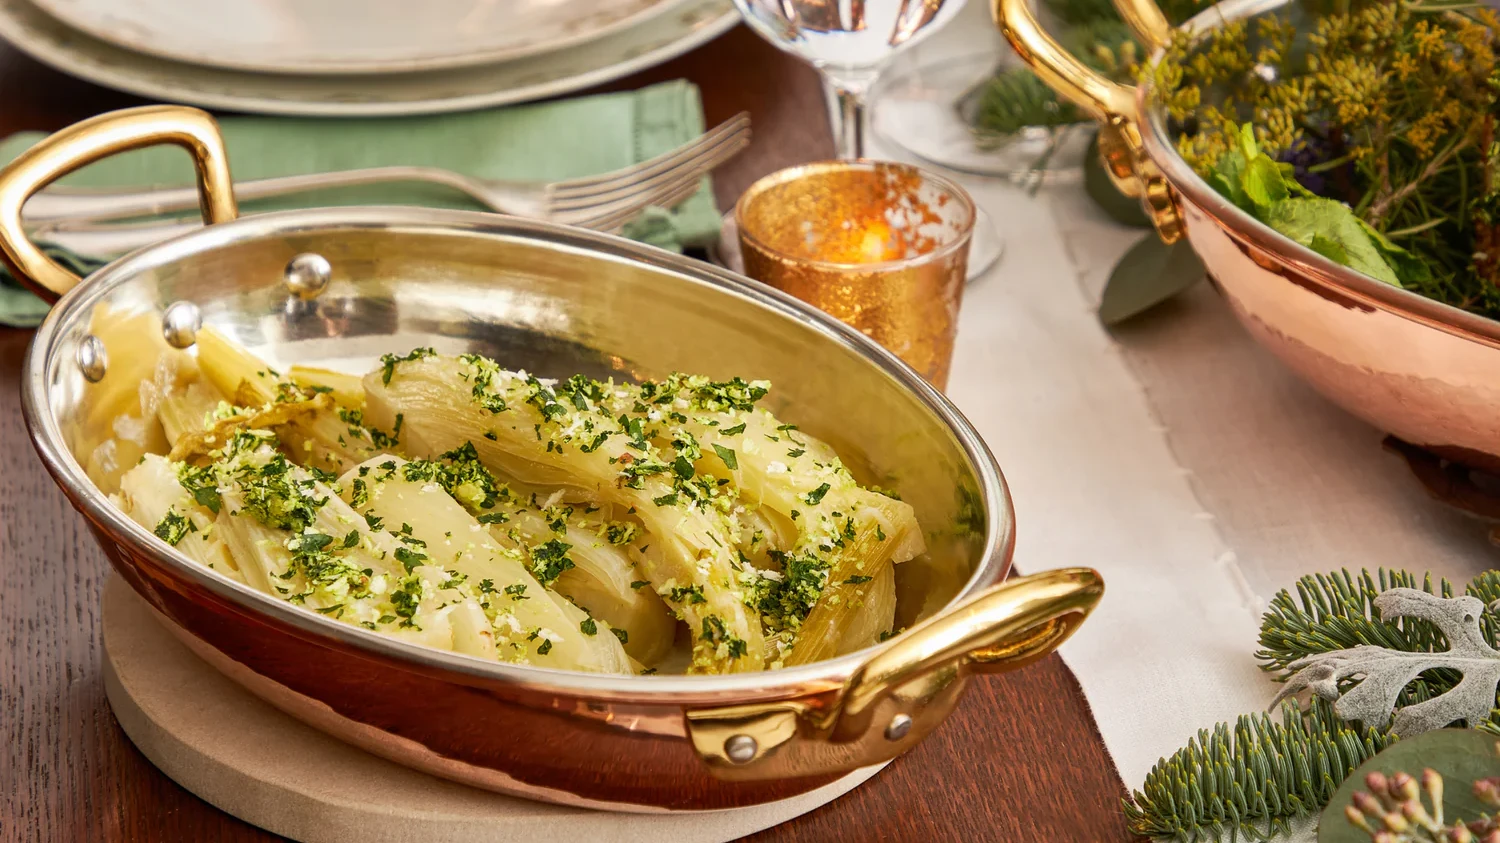 Image of Braised fennel